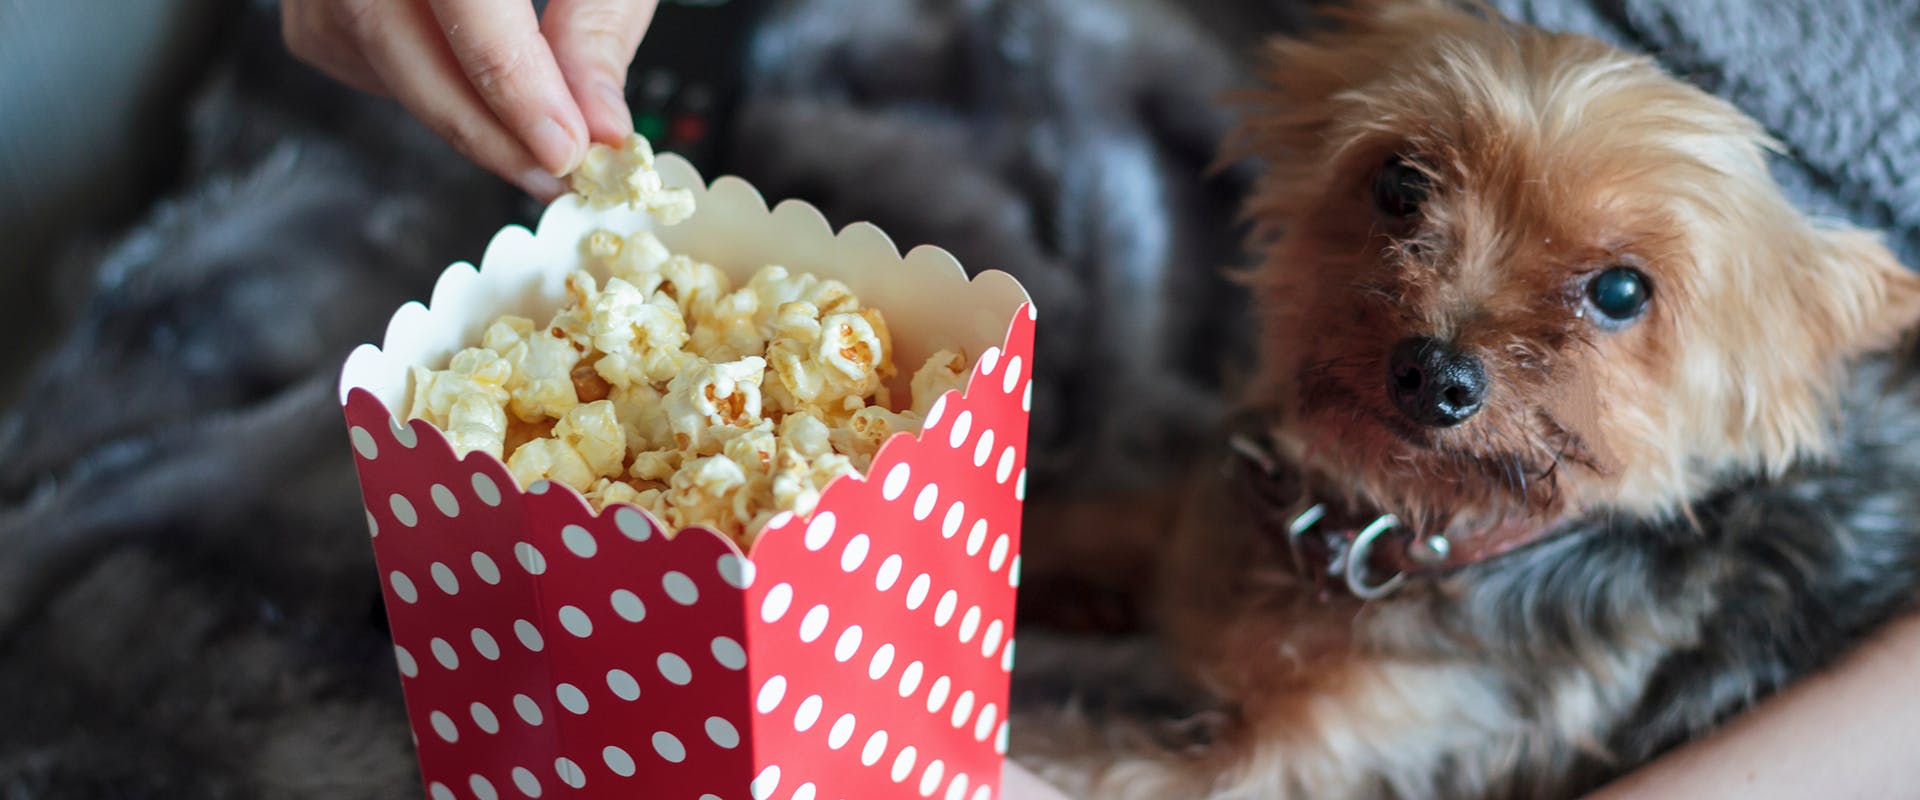 A dog sitting next to a box of popcorn, a handing reaching in to grab a piece